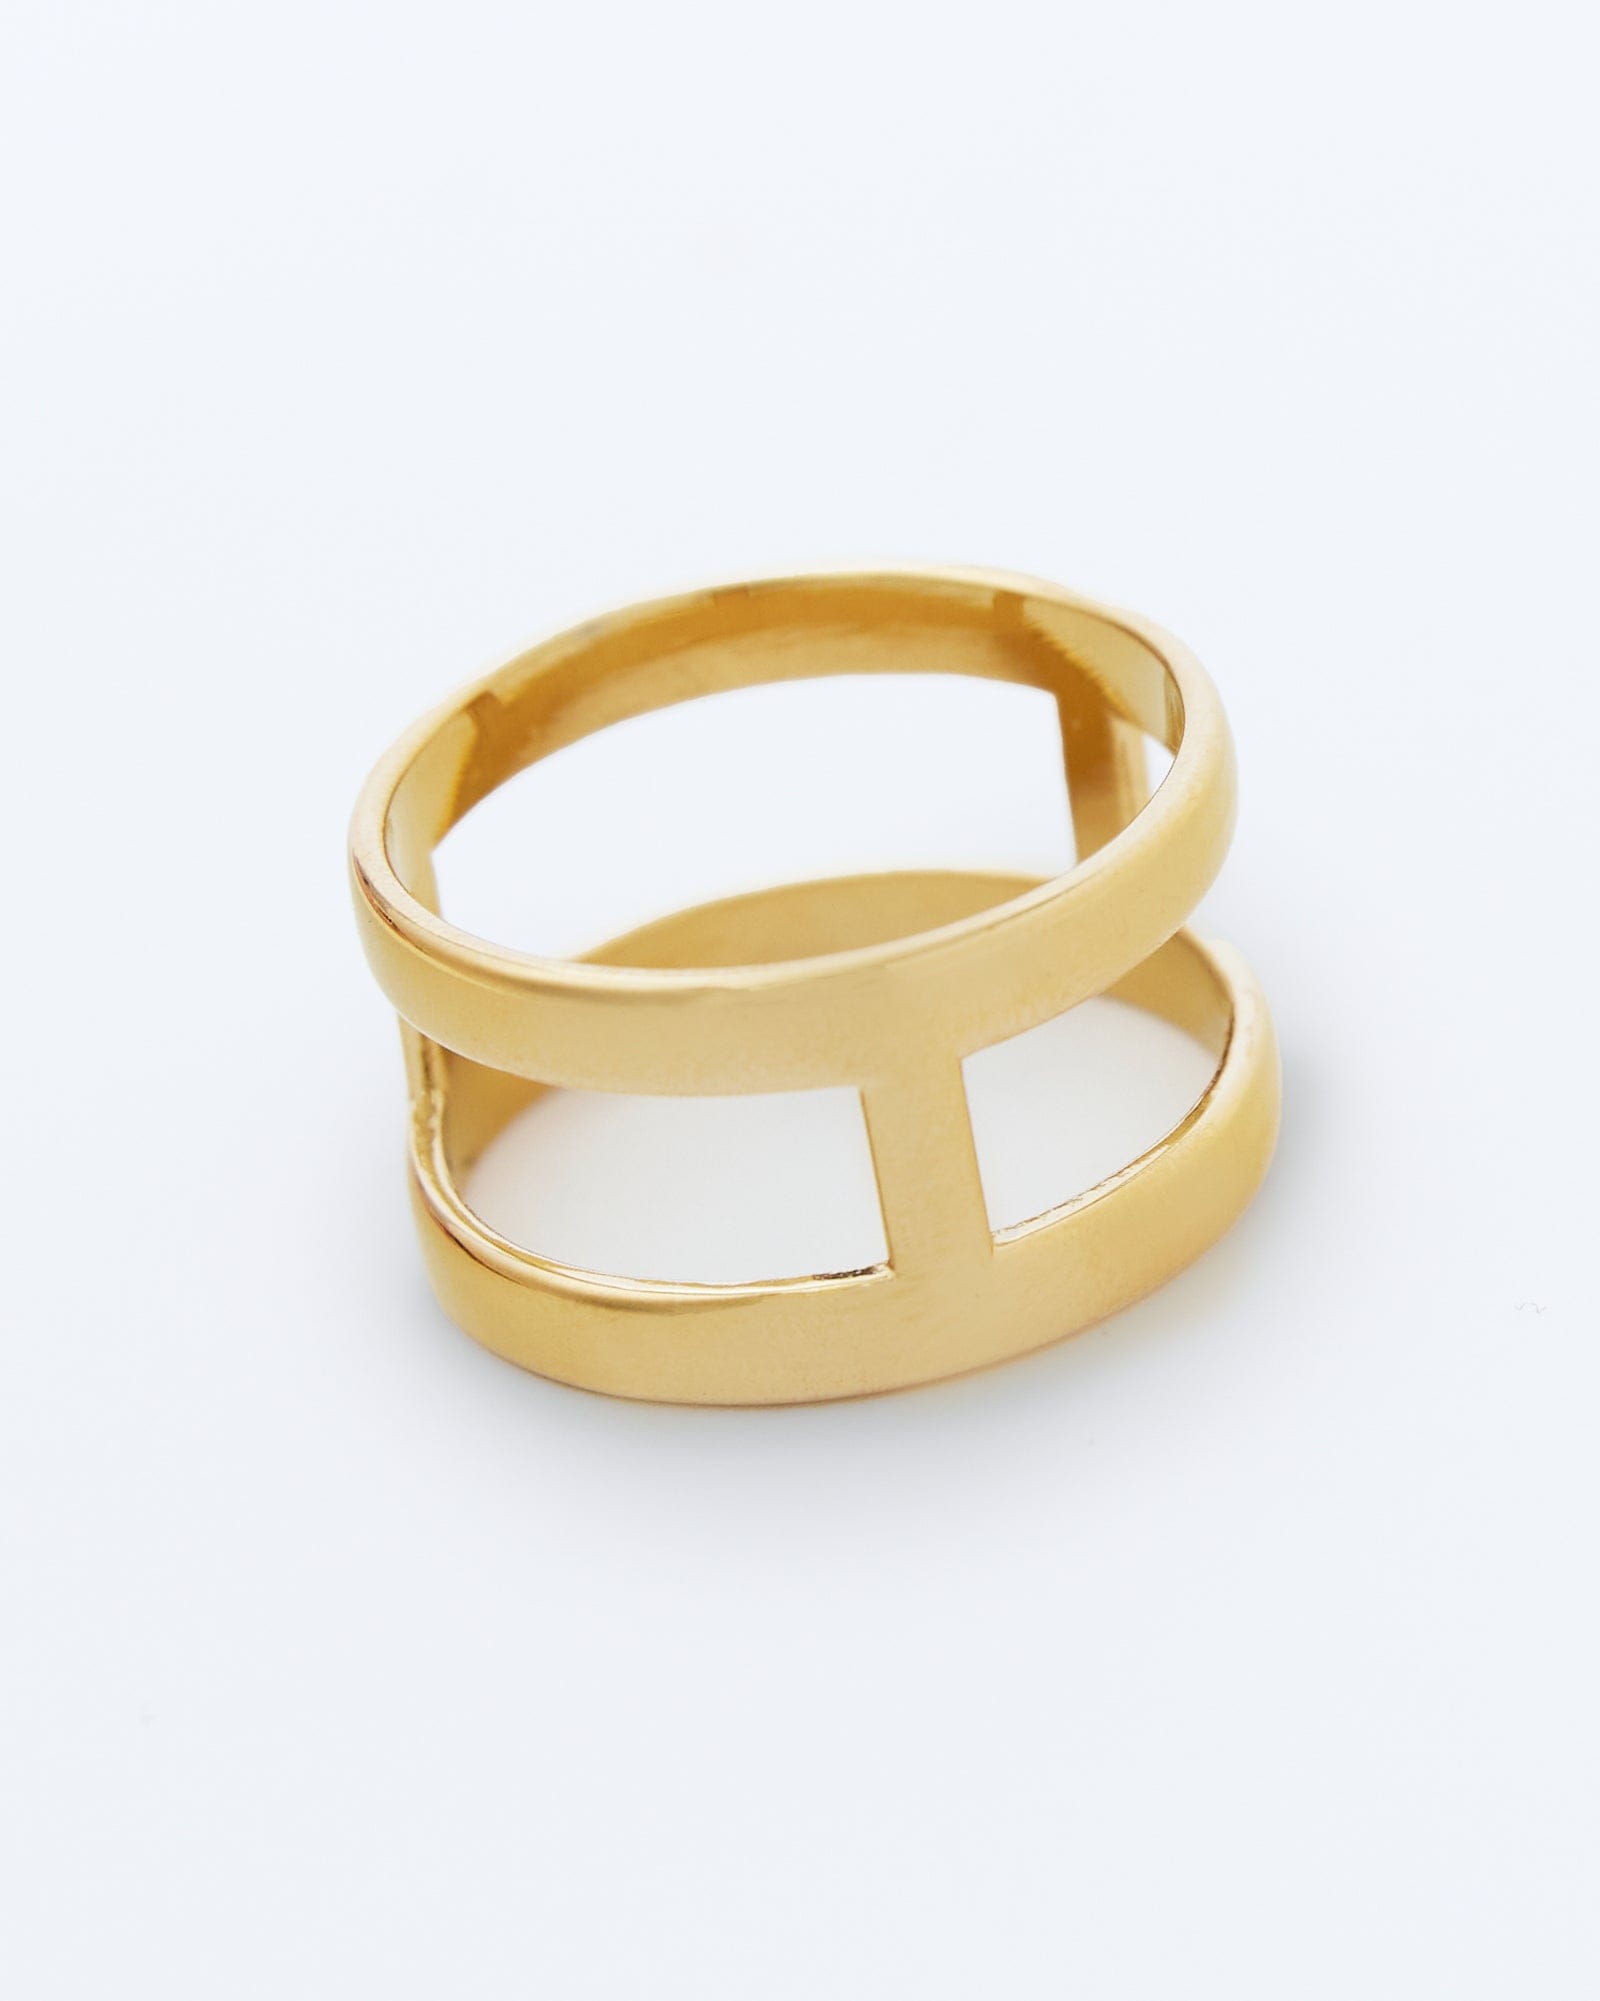 Gold ring with three cut outs.